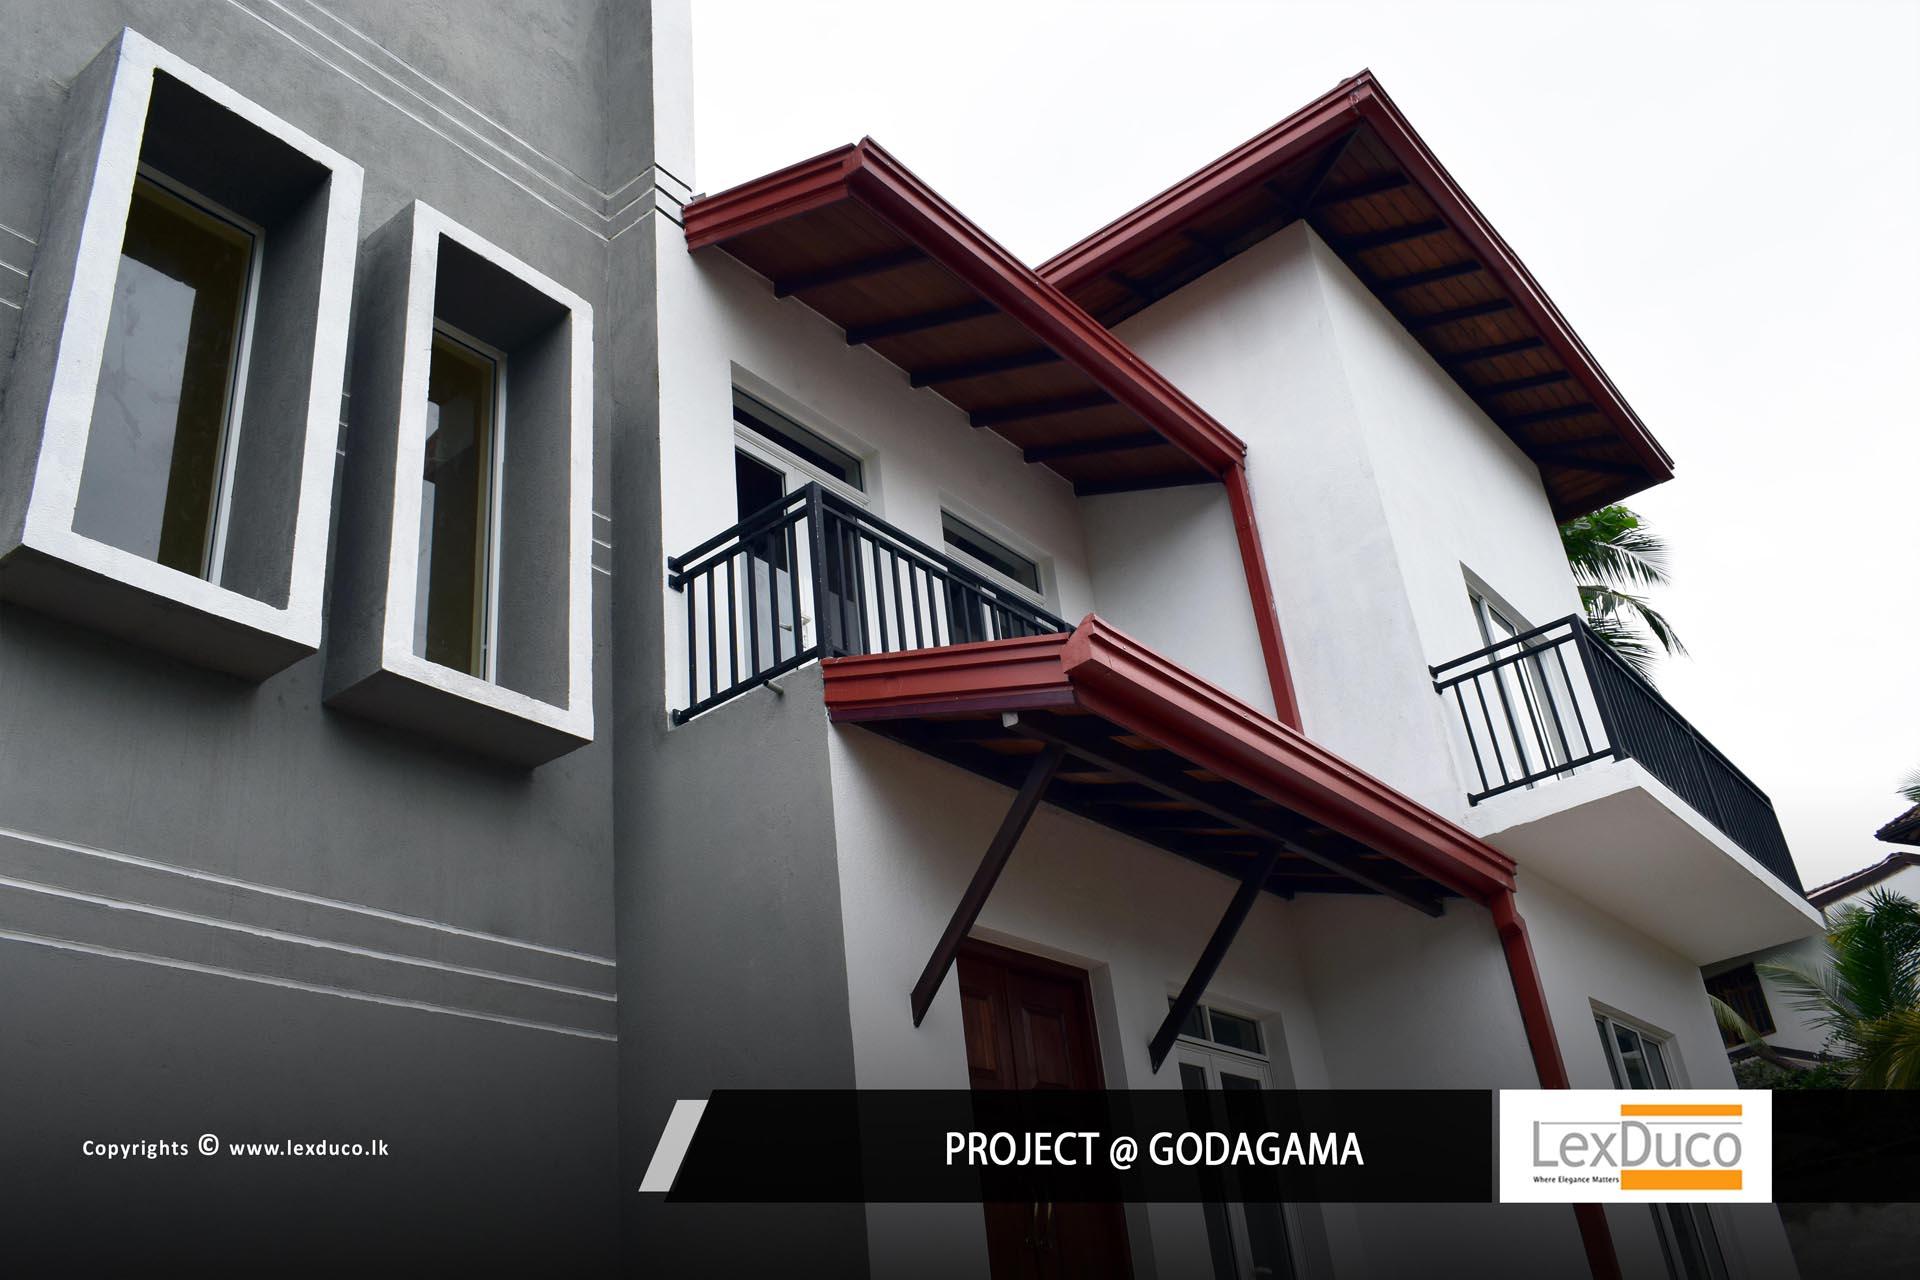 Residential Housing Project at Godagama | Lex Duco